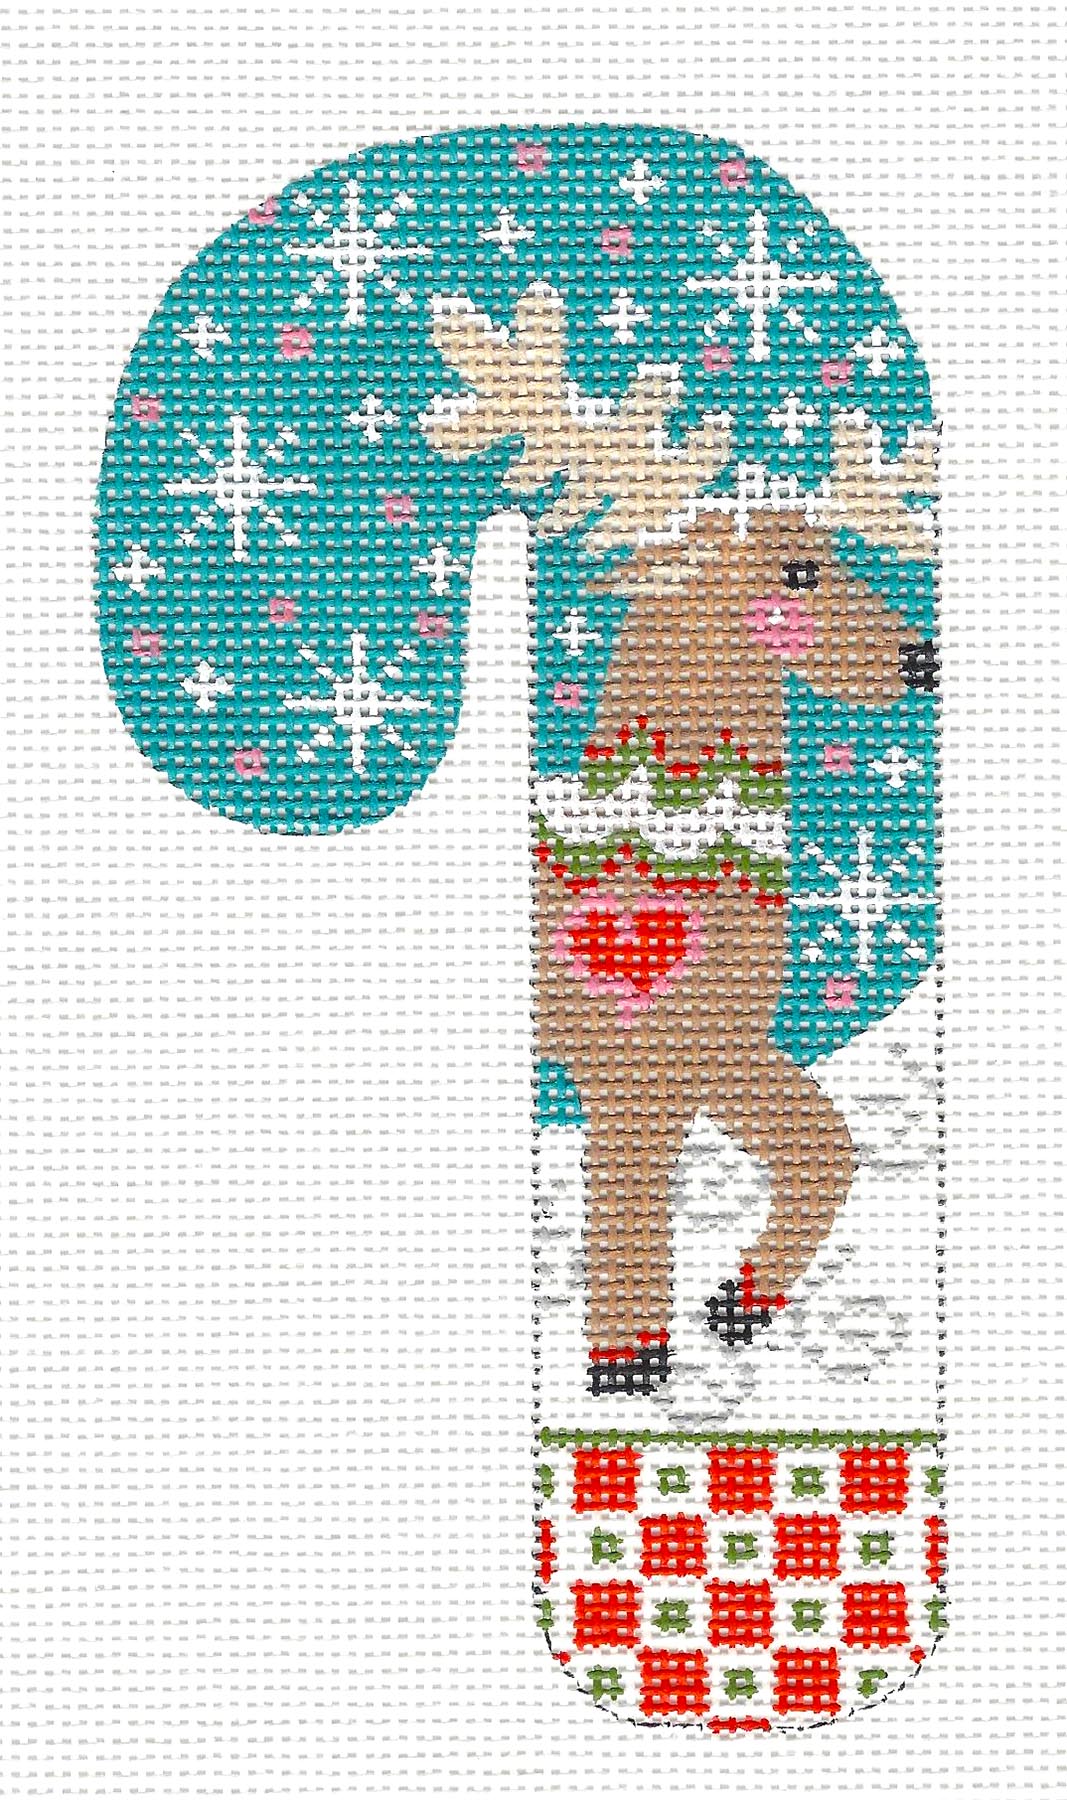 Medium Candy Cane ~ Christmas Reindeer with Snowflakes and STITCH GUIDE Needlepoint Canvas By Danji